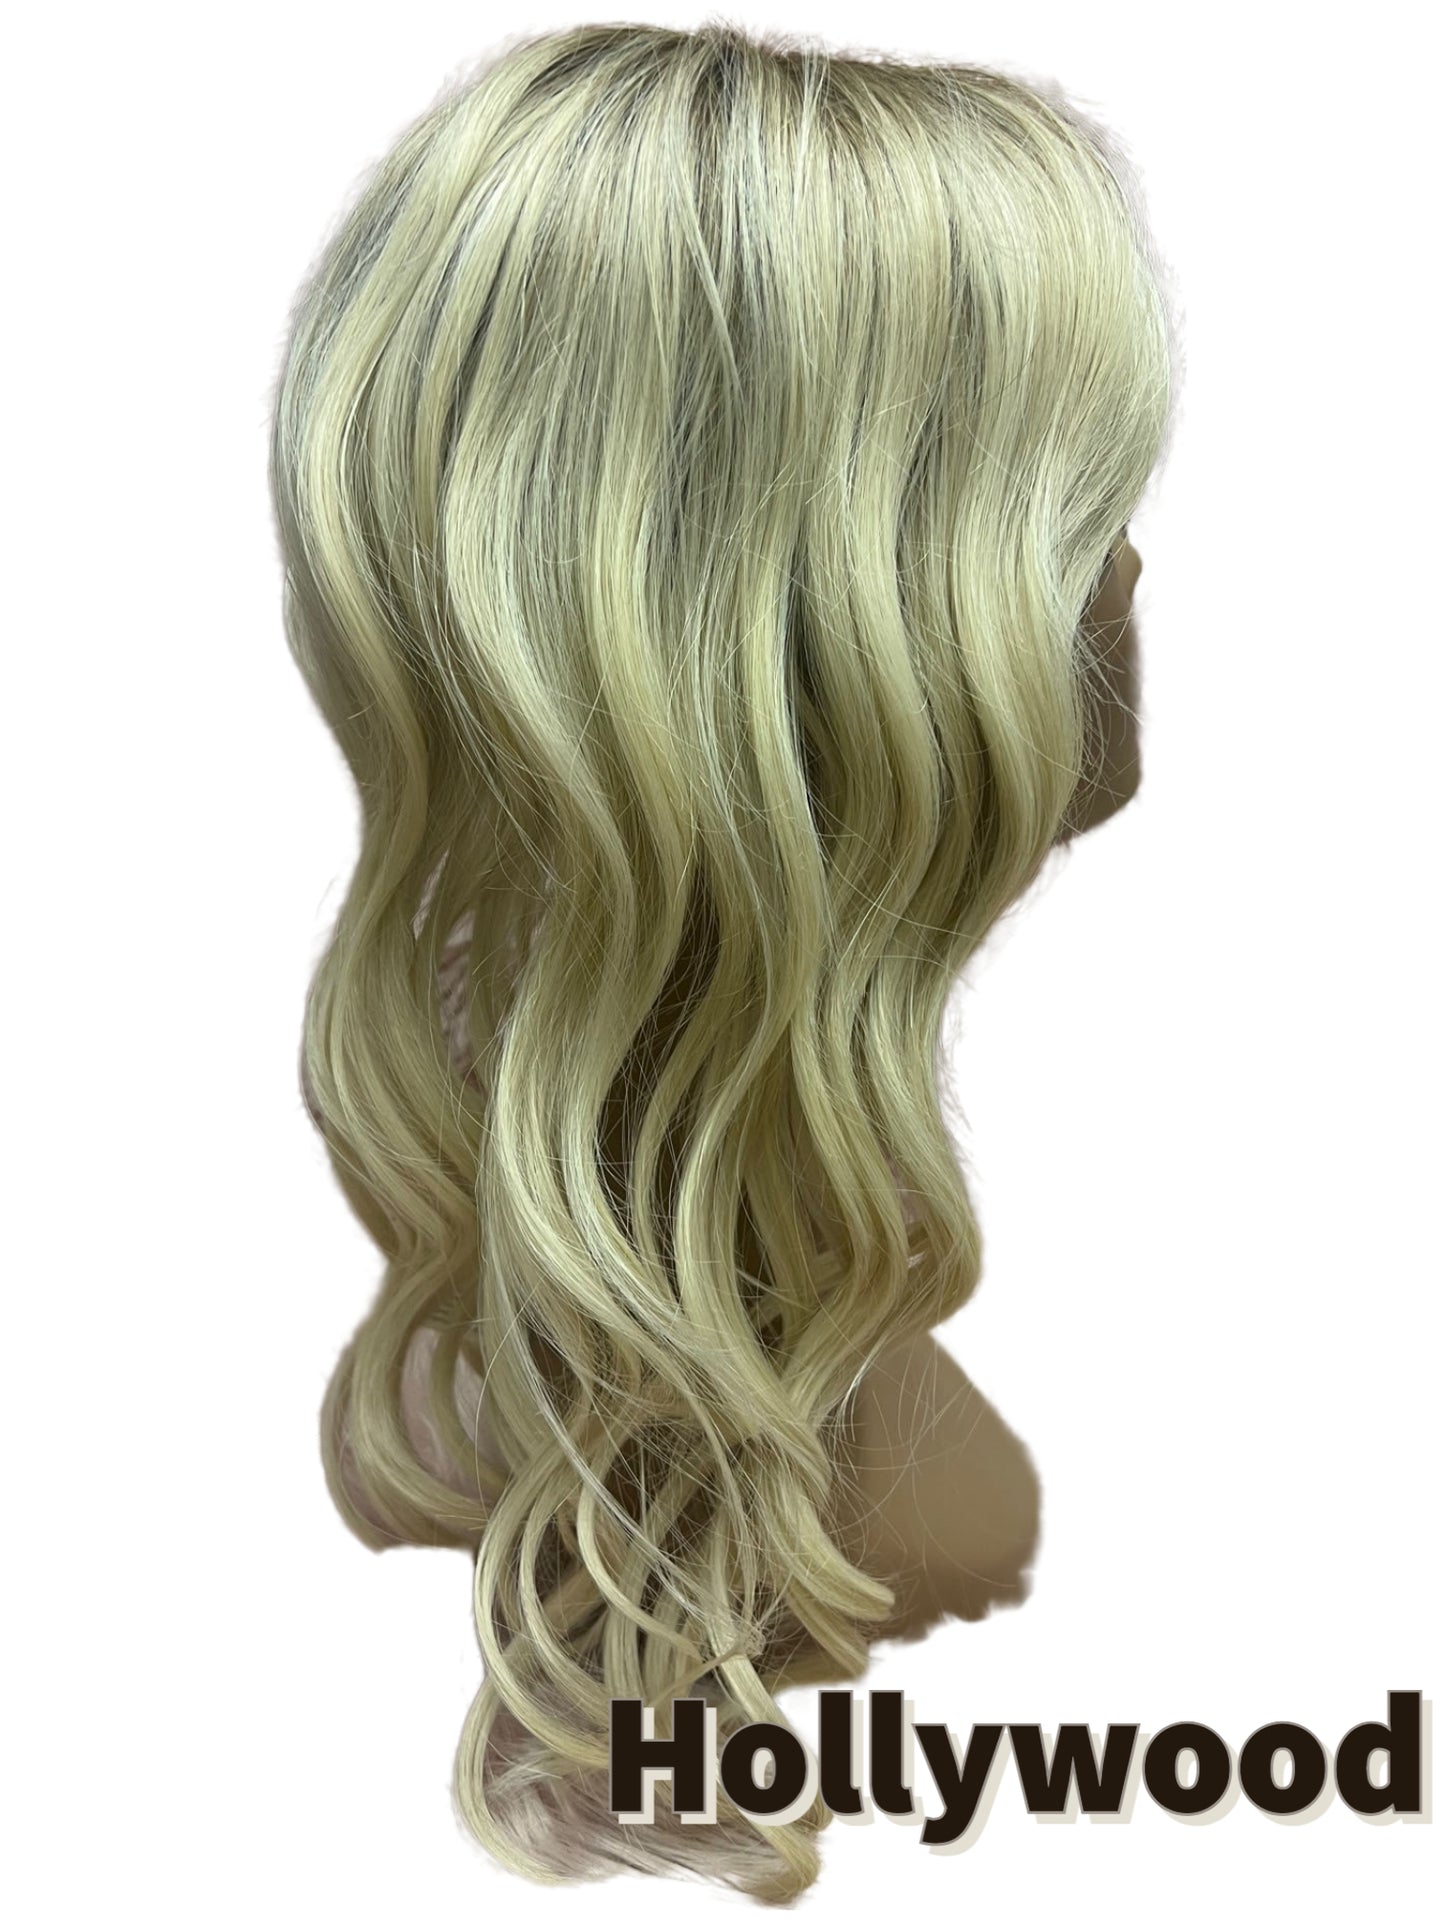 18 Inch Topper Wavy LACE FRONT - 40% OFF THIS PRICE NO CODE NEEDED - FINAL SALE